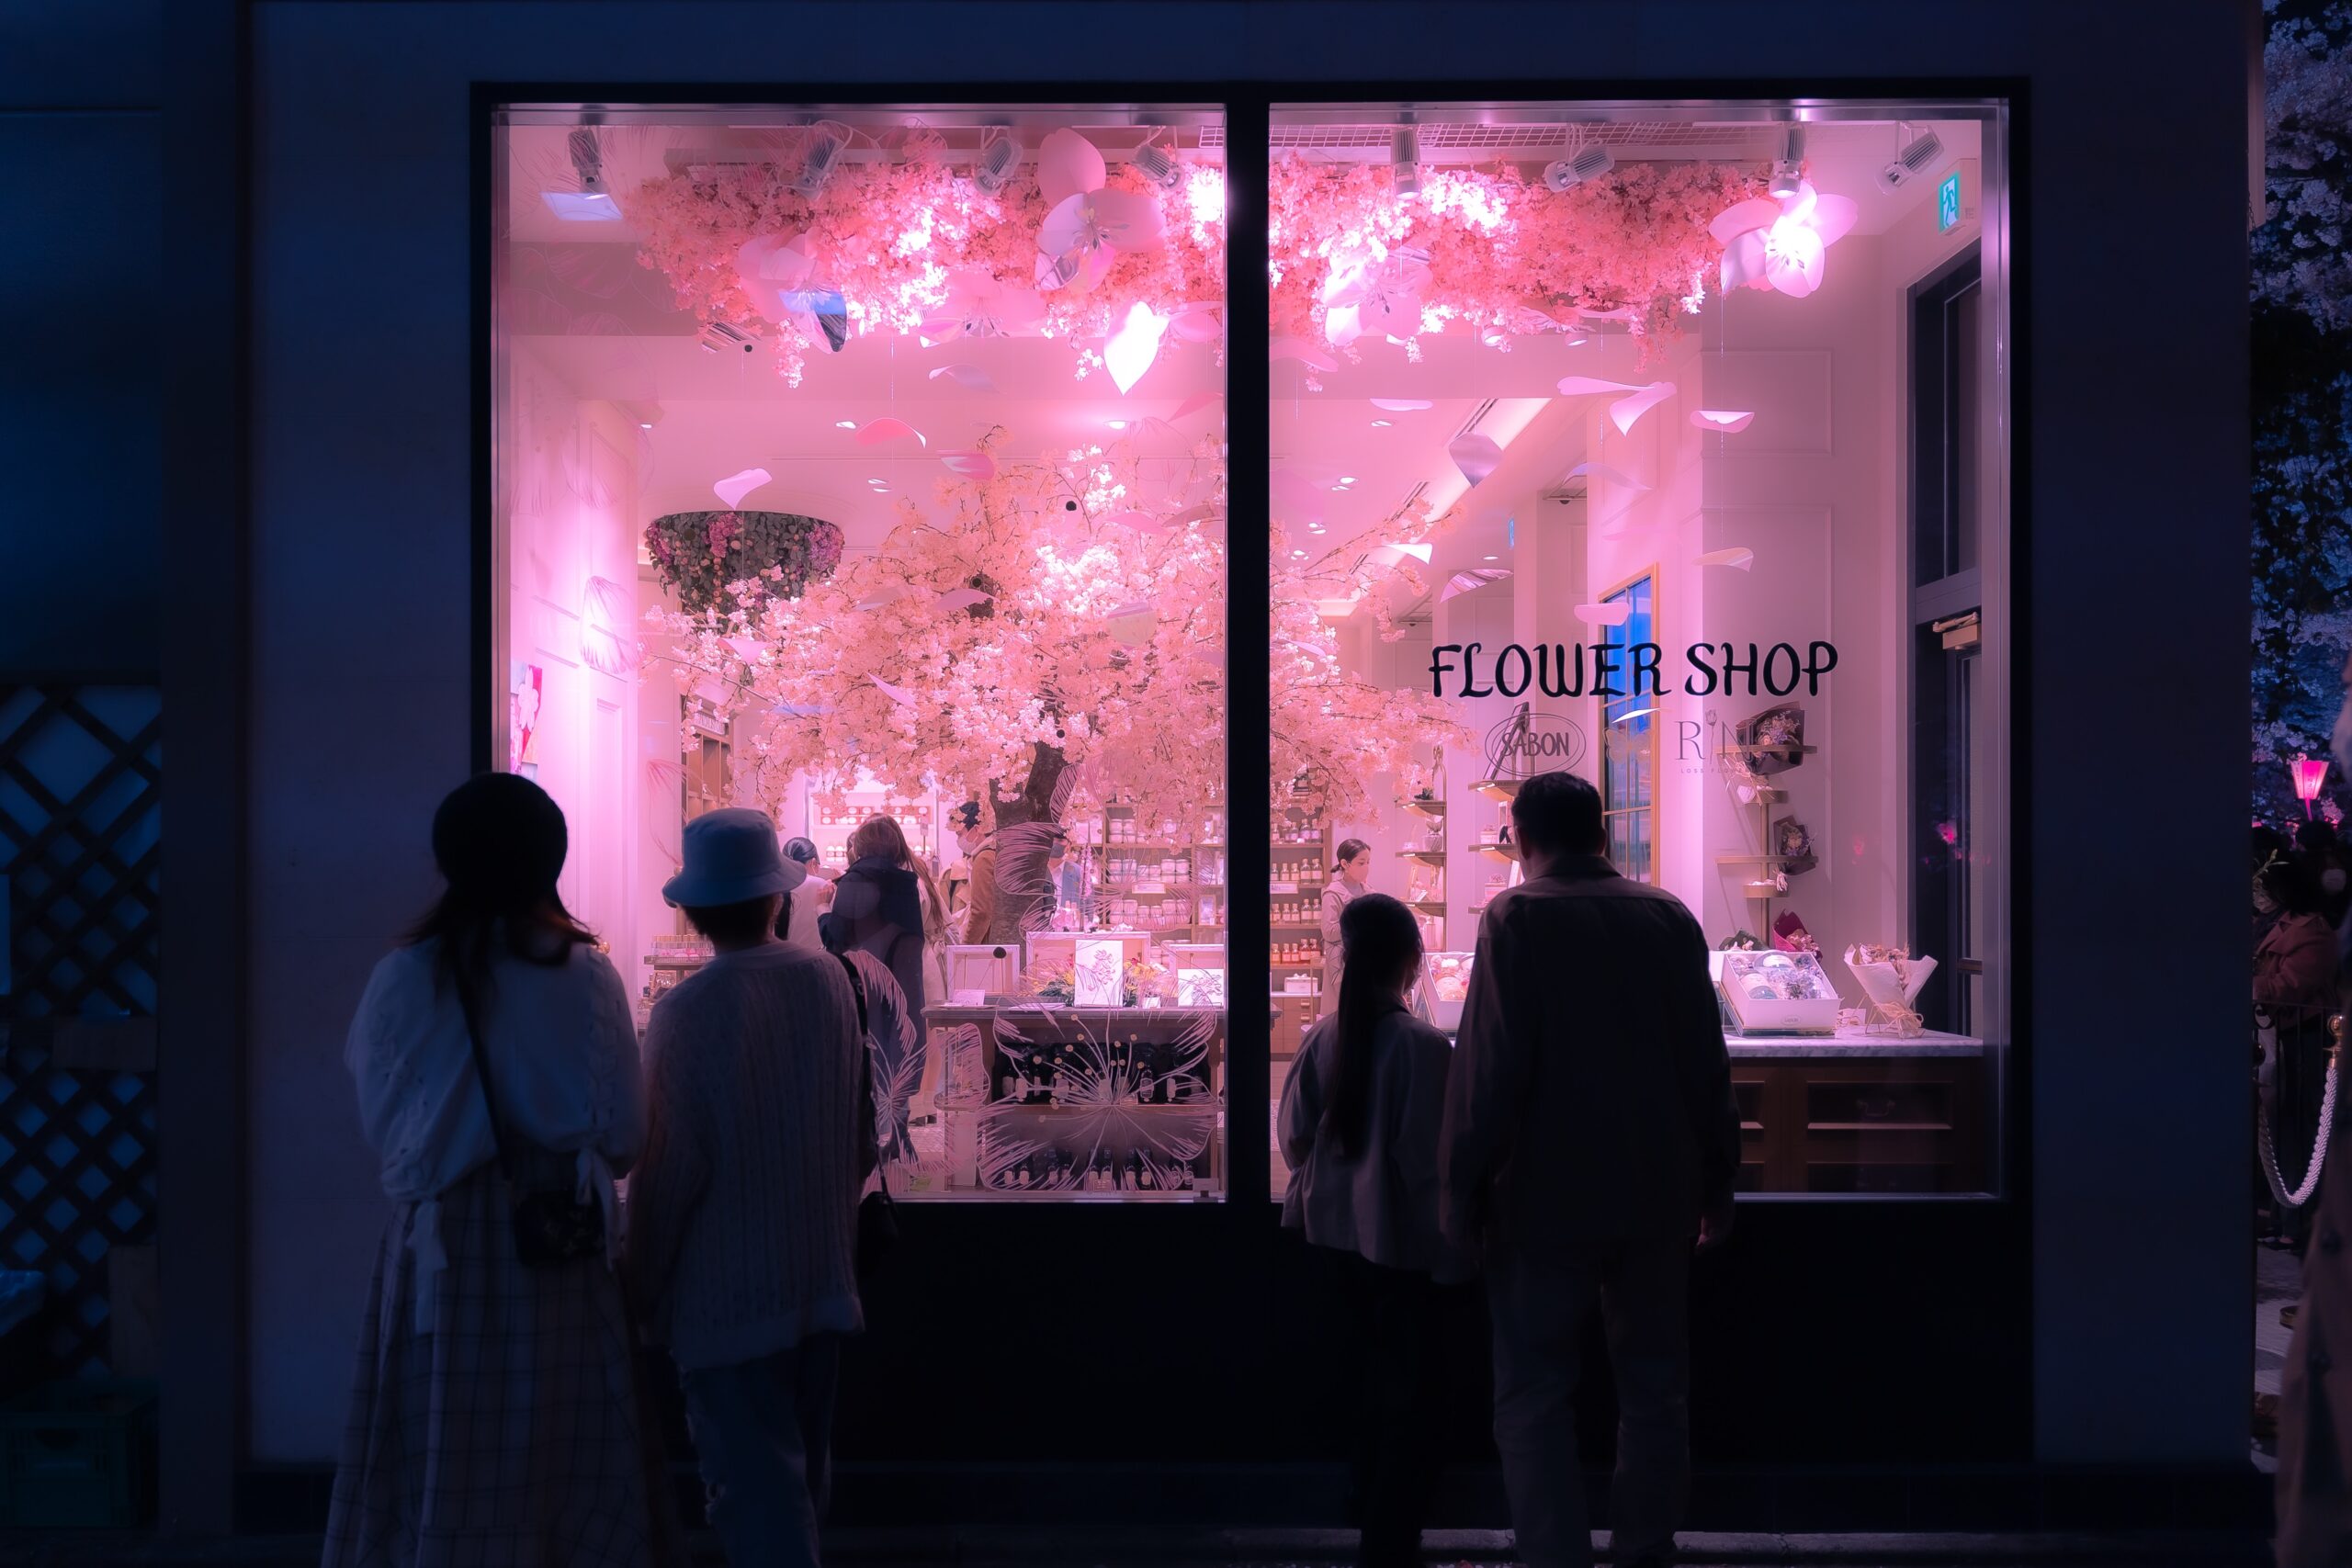 Southern and northern cities of Japan hold sakura in high regard. There are differing times that travelers should visit each region so they can have the best experience.
pictured: A Japanese flower shop with people looking through the shop window that is decorated with pink cherry blossoms 